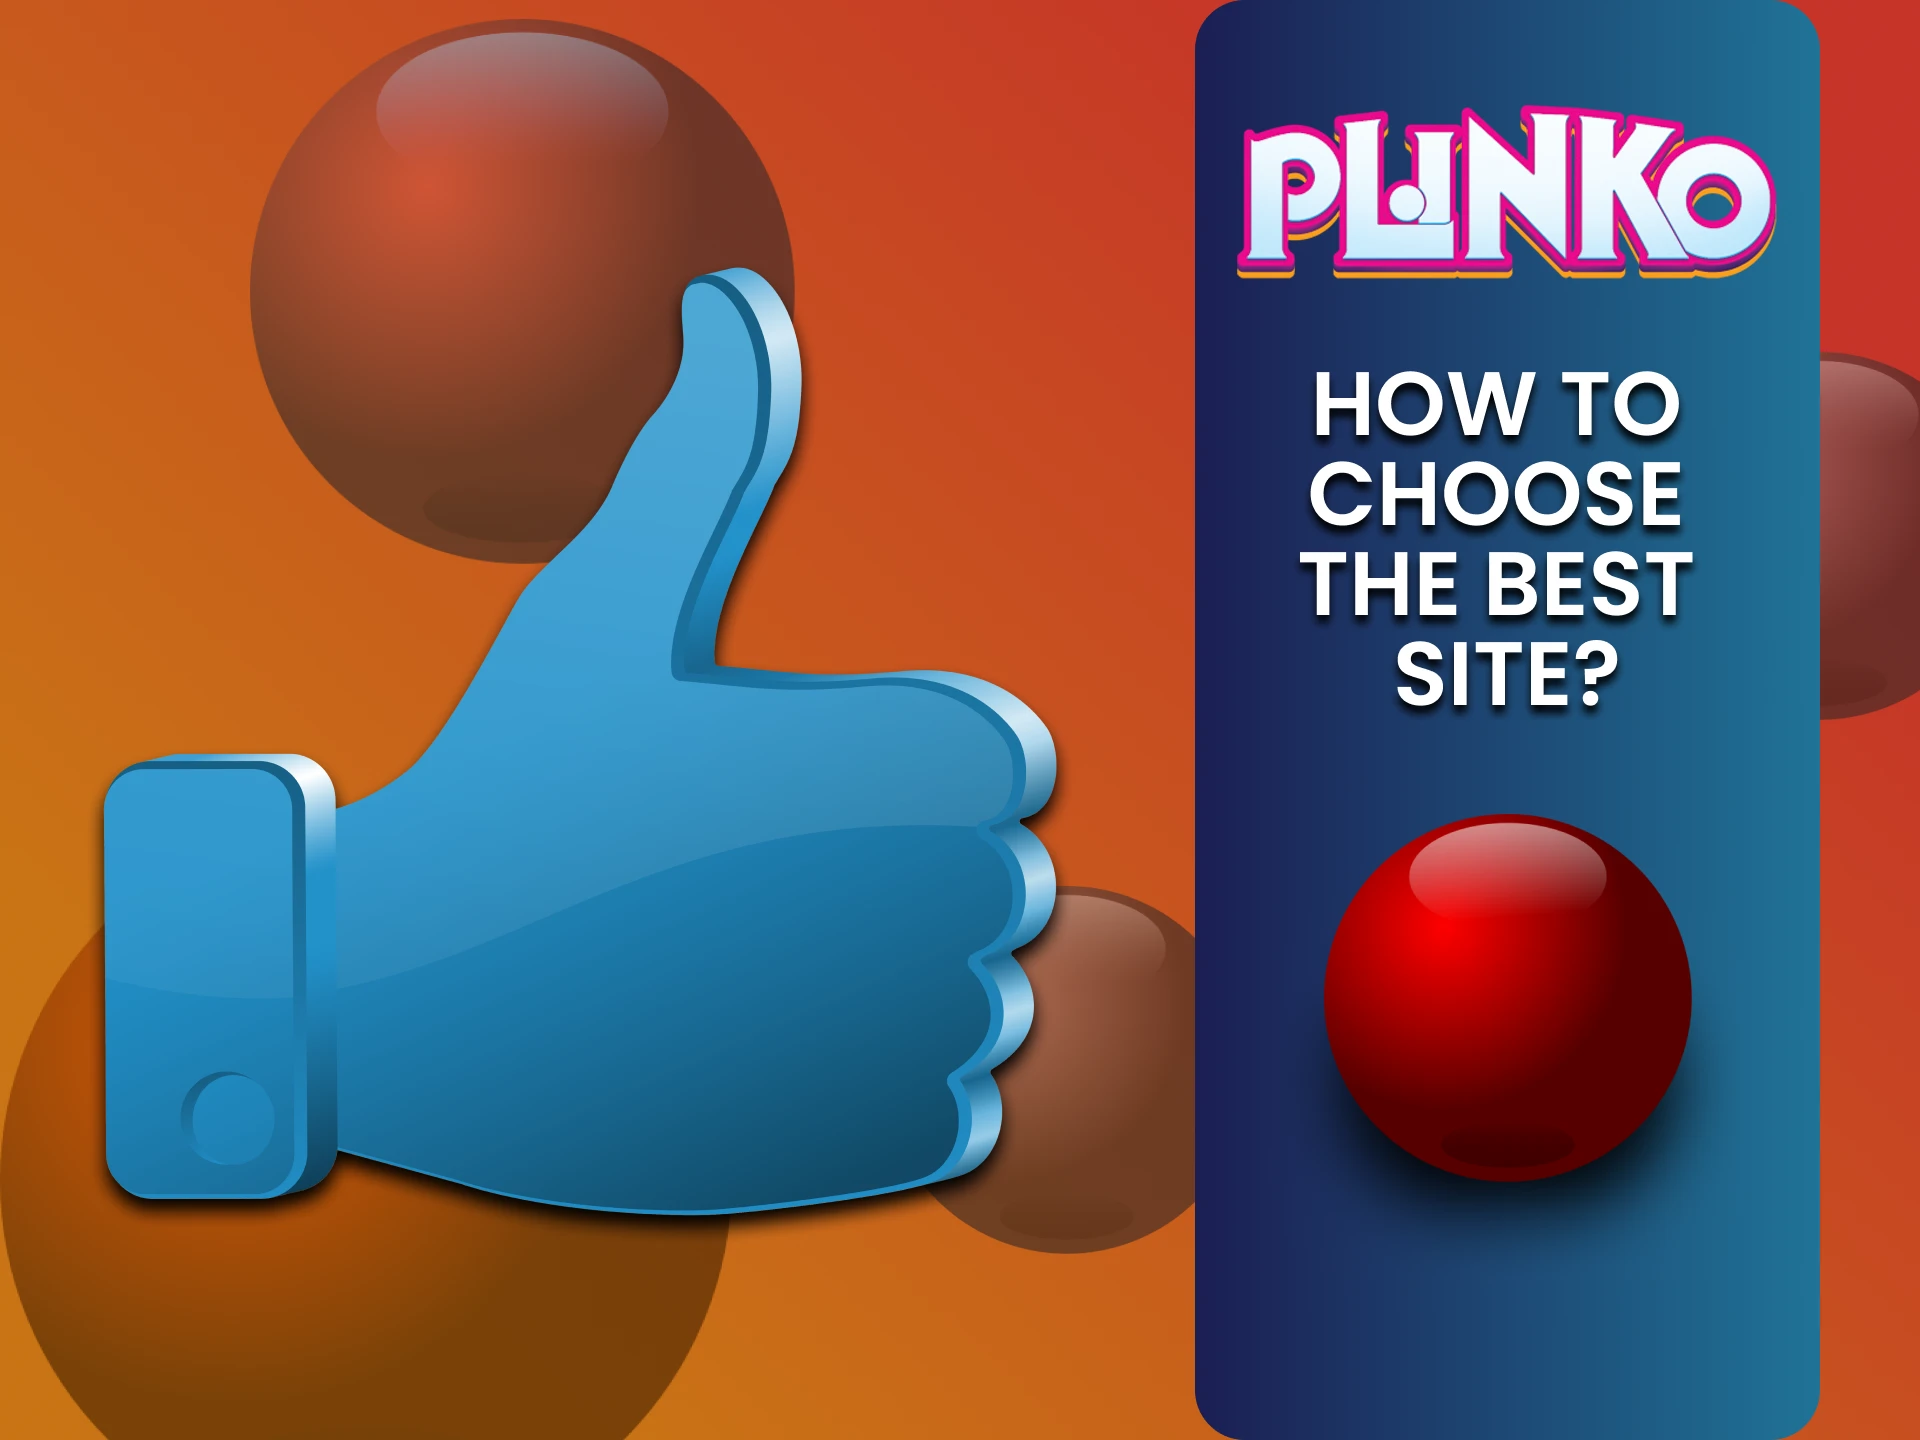 We will tell you how to choose a site for playing Plinko.